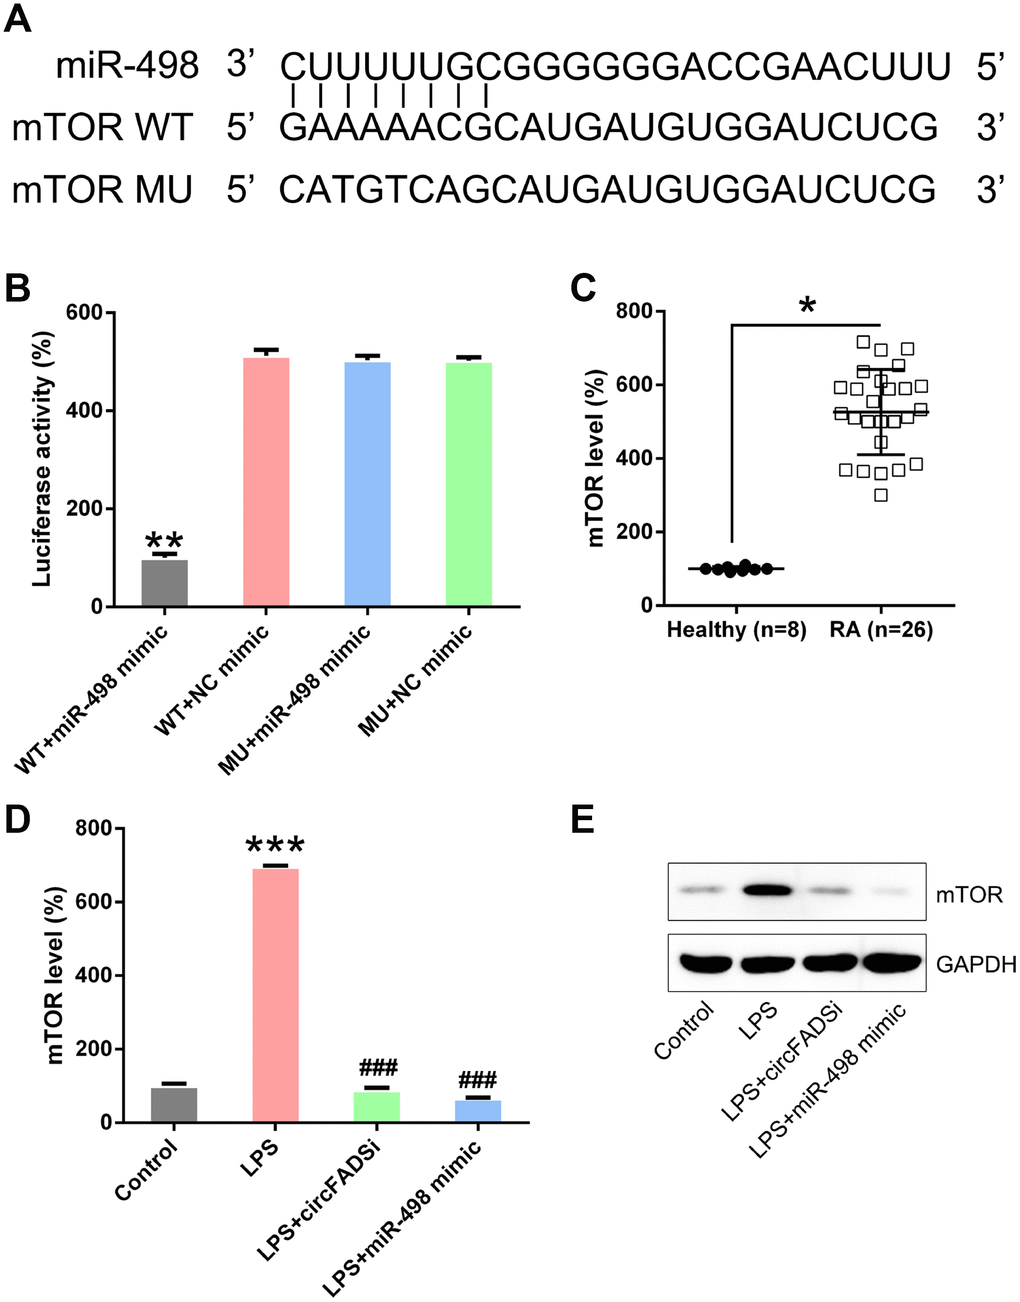 miR-498 targets the mTOR. (A) Bioinformatic analysis showing that miR-498 has a binding site in the 3′-UTR of mTOR. (B) DLRA was performed following co-transfection of chondrocytes with a luciferase reporter containing either a WT (wild-type) or MU (mutant) mTOR and a miR-498 mimic. (C) qPCR analysis showing the significantly increased mTOR expression levels in RA patients. (D, E) Chondrocytes were transfected with si-circFADS2 or miR-498 mimic and then treated with LPS. qPCR and WB analysis were carried out to detect mTOR levels in each group. *P #P ###P 